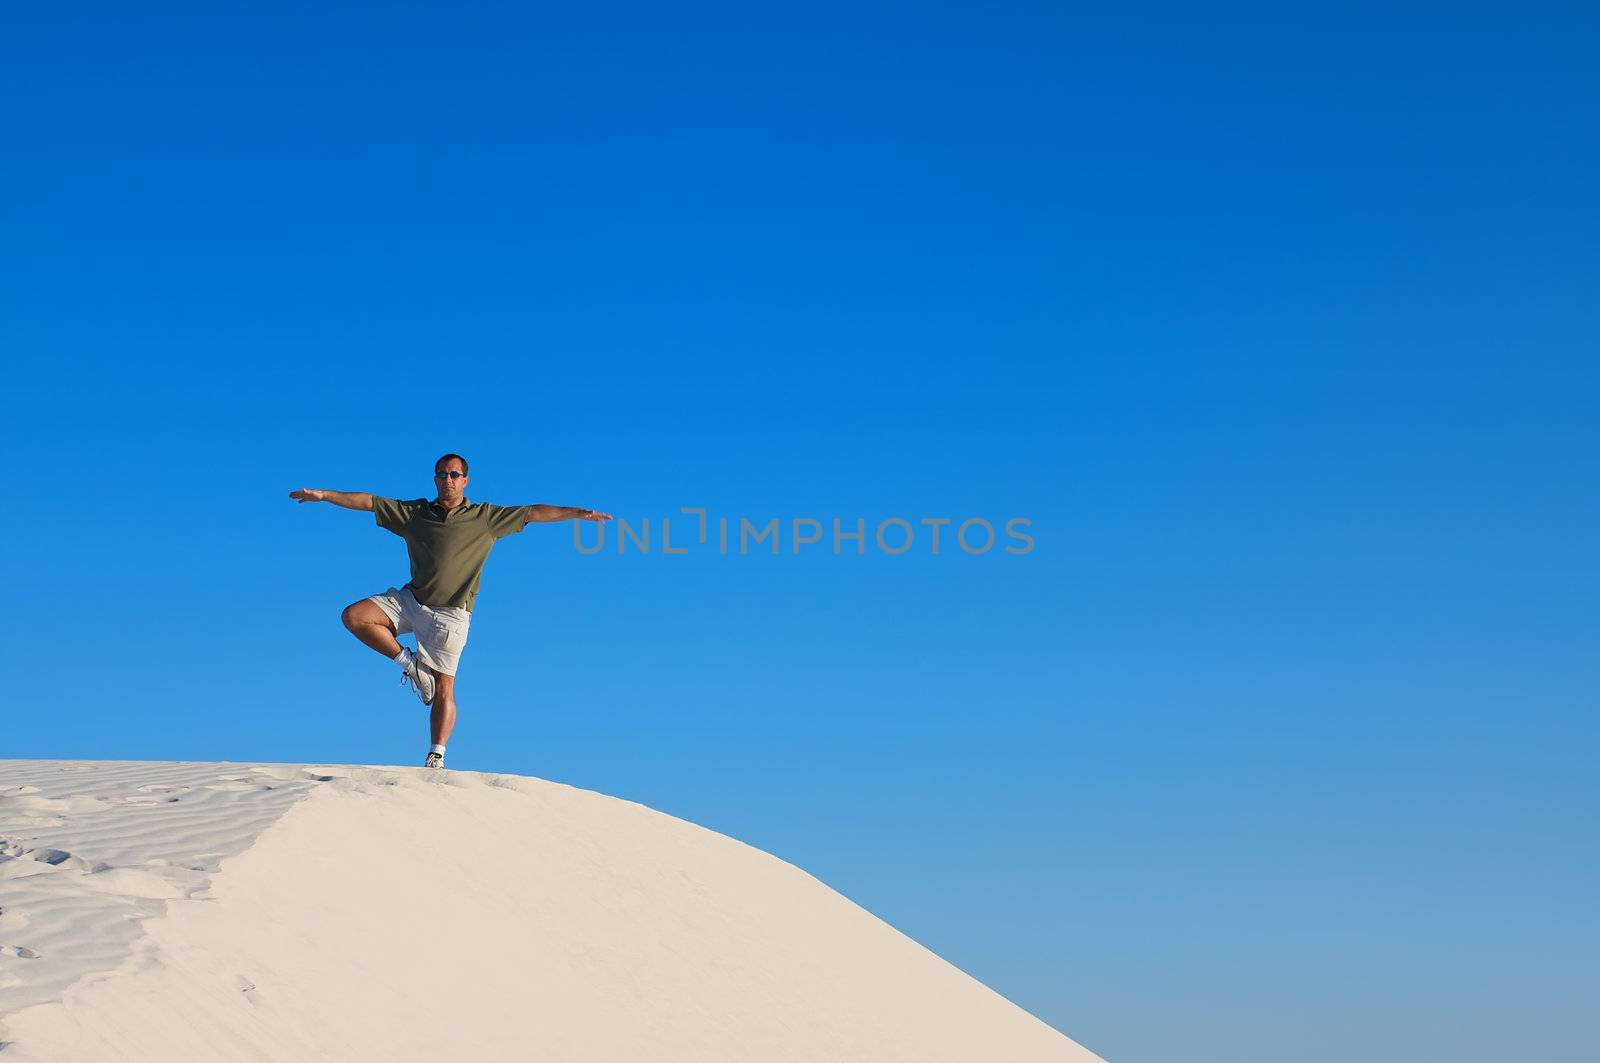 Man in a red shirt with his arms raised in a yoga tree pose looking off into the distance on top of a white sand dune with a blue sky